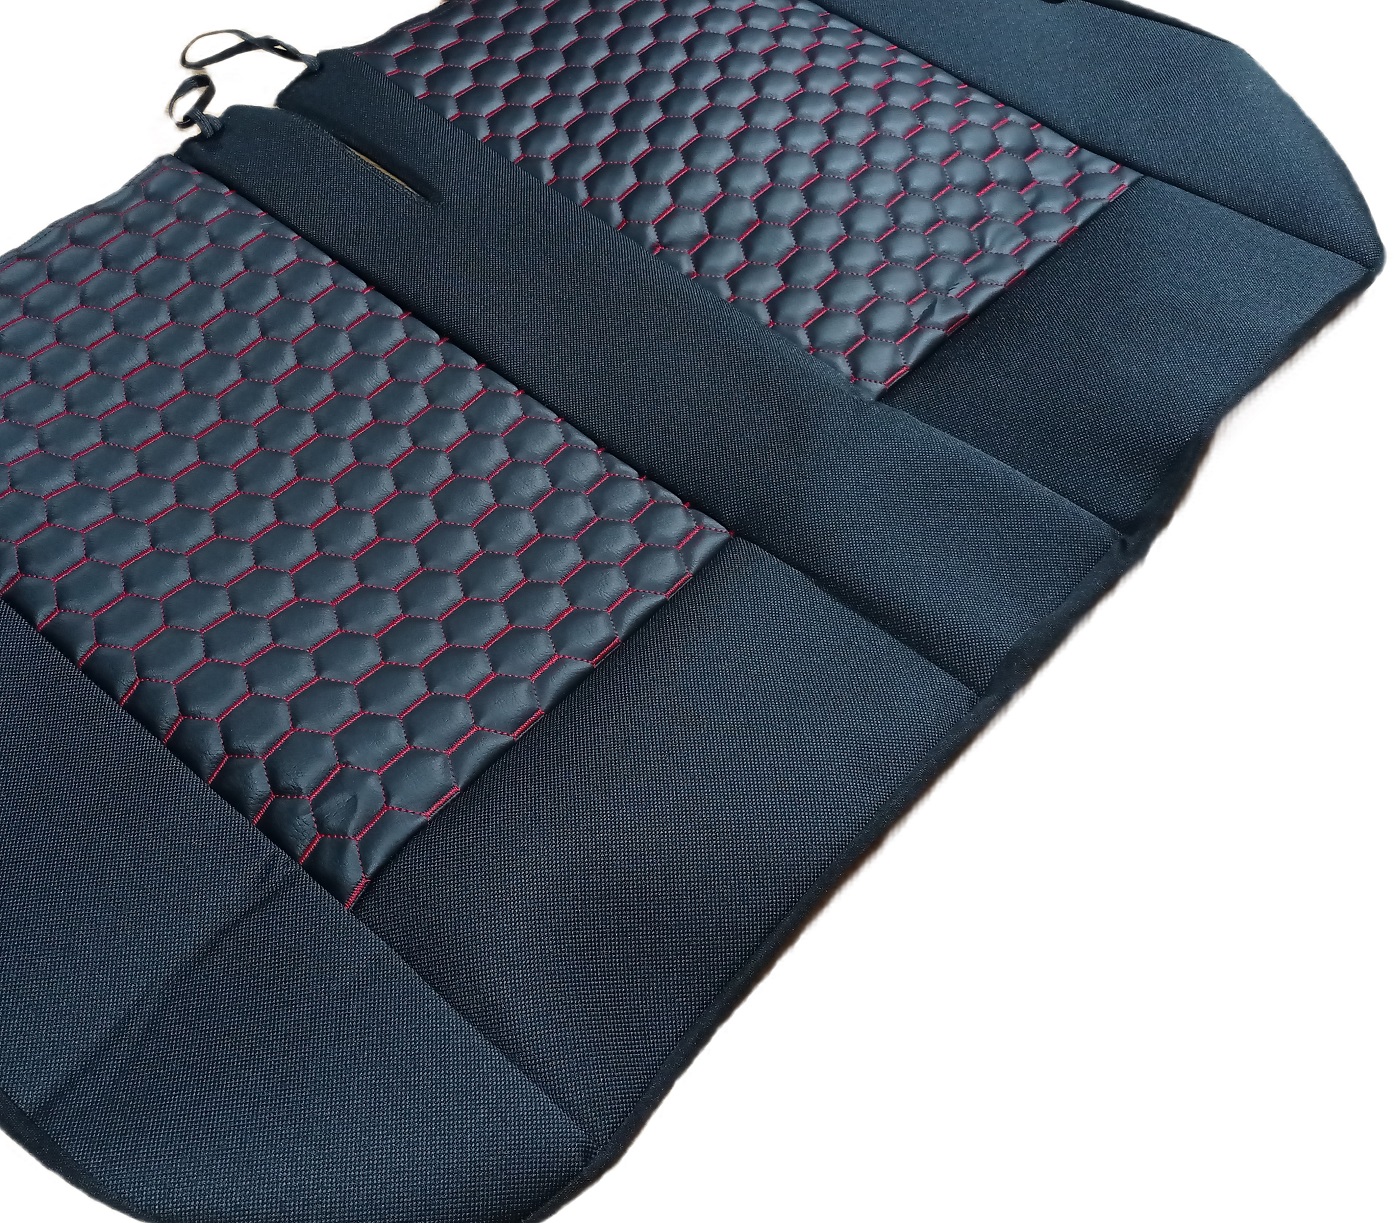 Seat covers for CITROEN JUMPER Van Black Red Seam Leather